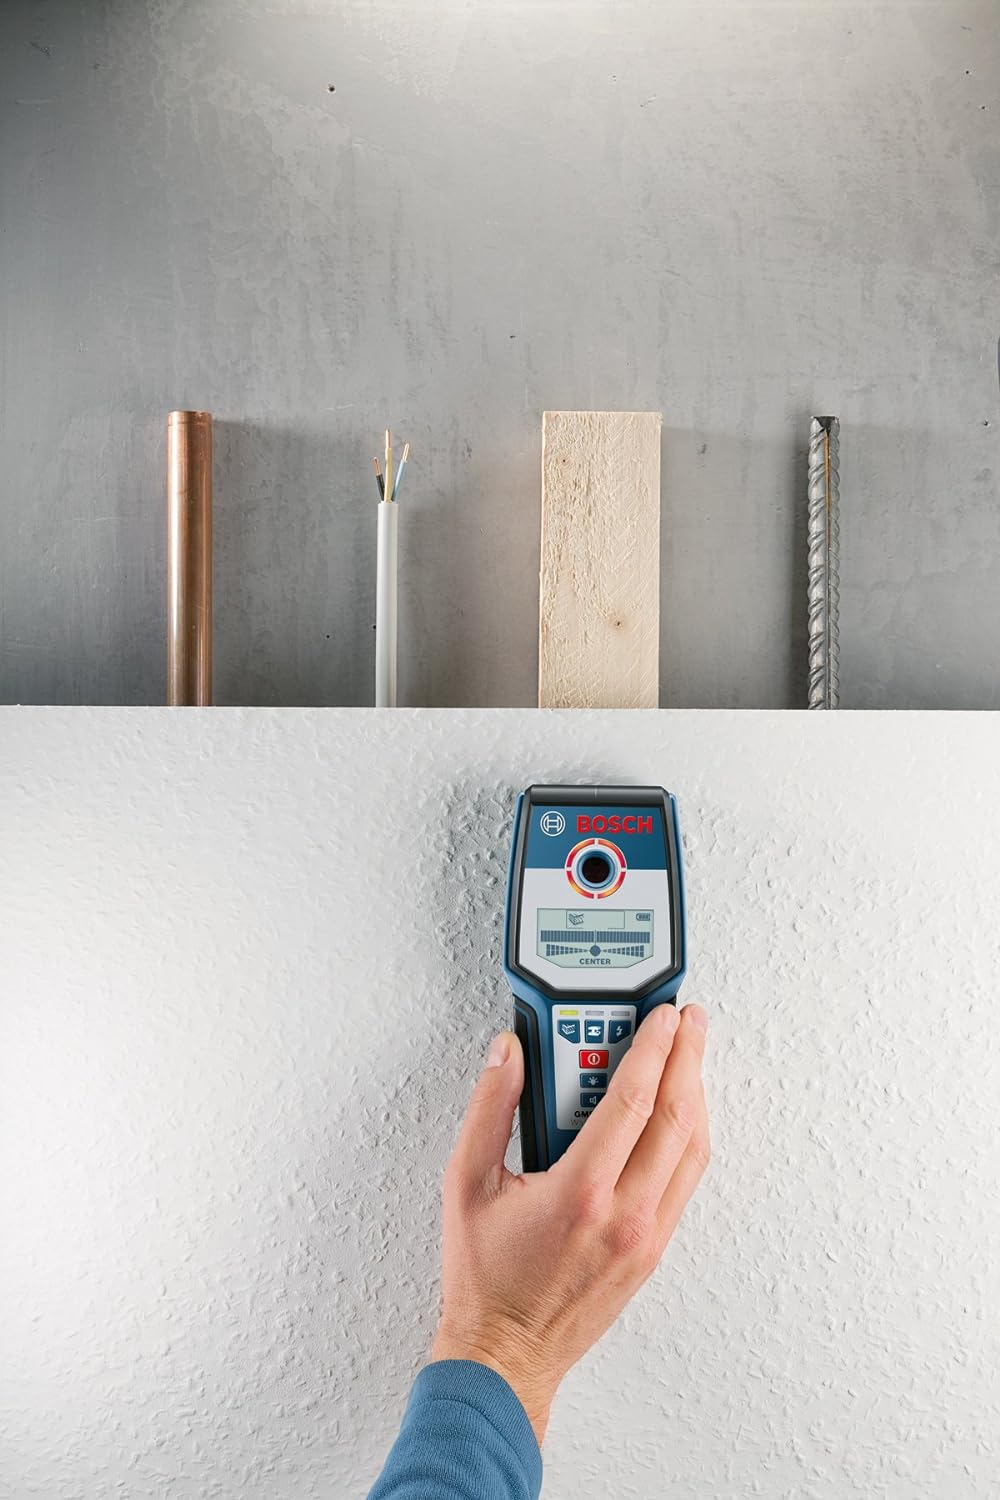 Bosch Digital Multi-Scanner with Modes for Wood, Metal & Live Wiring